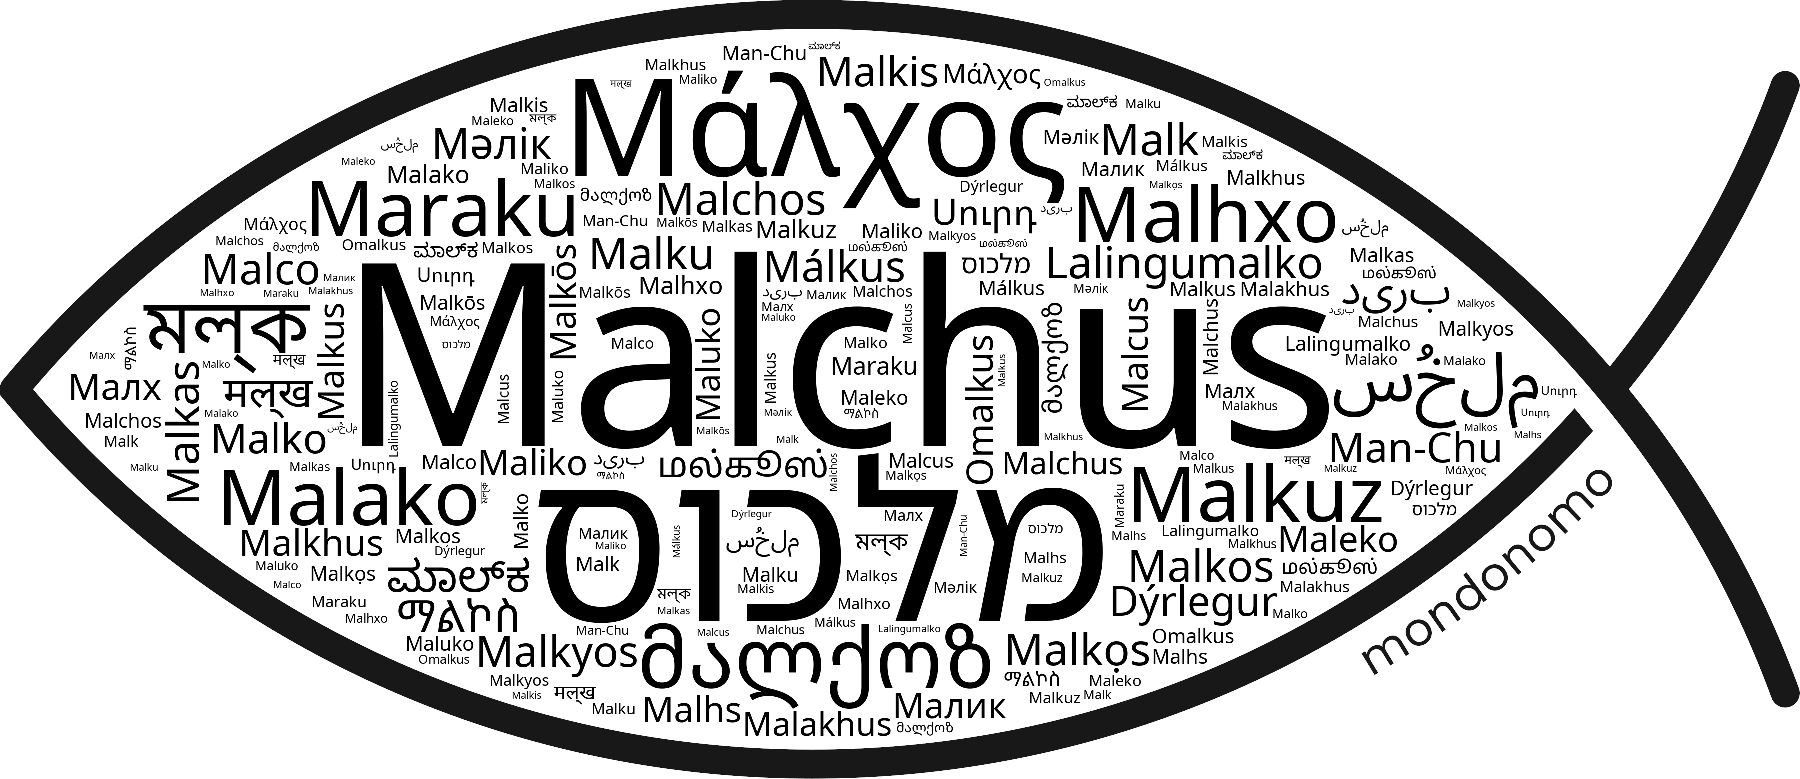 Name Malchus in the world's Bibles